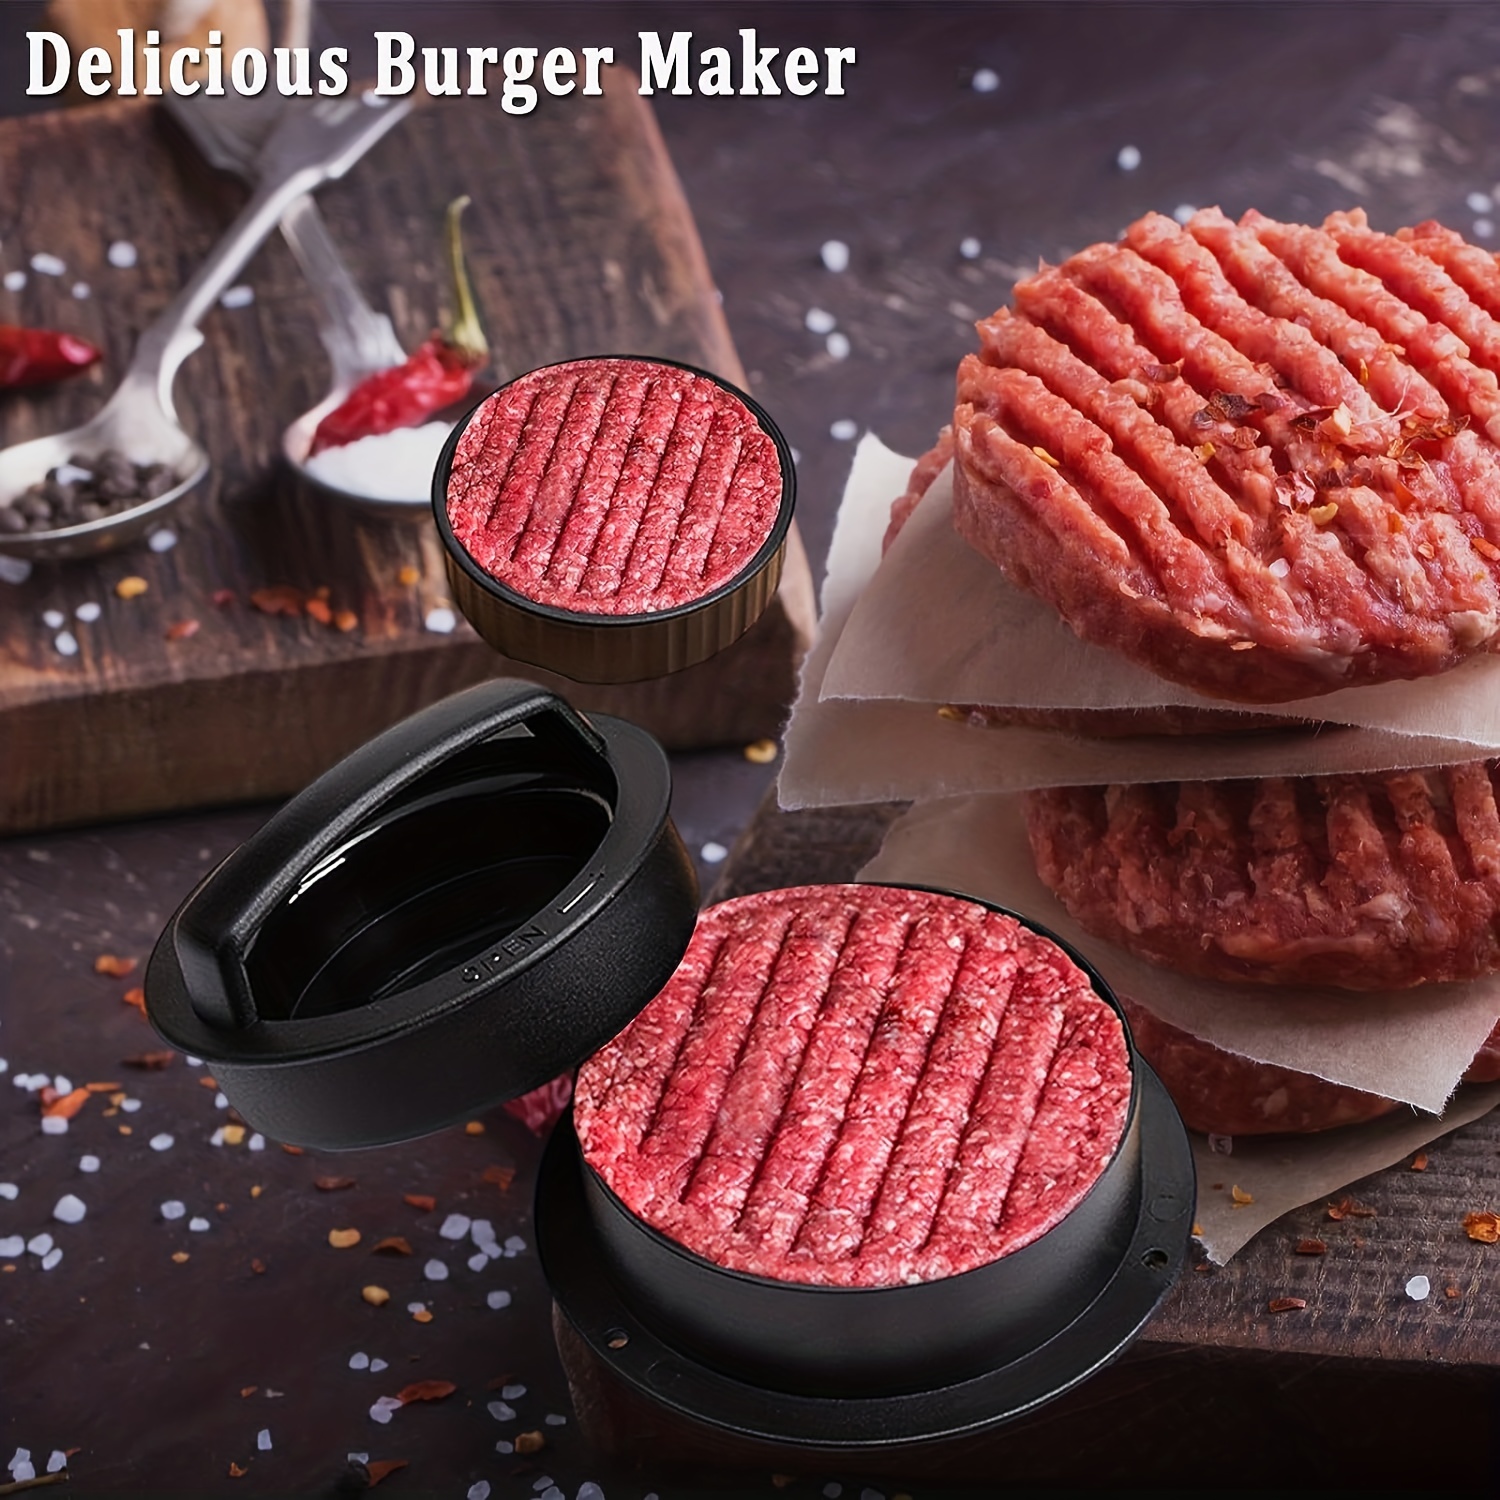 Cast Iron Burger Press Perfect For Making Crispy Evenly - Temu